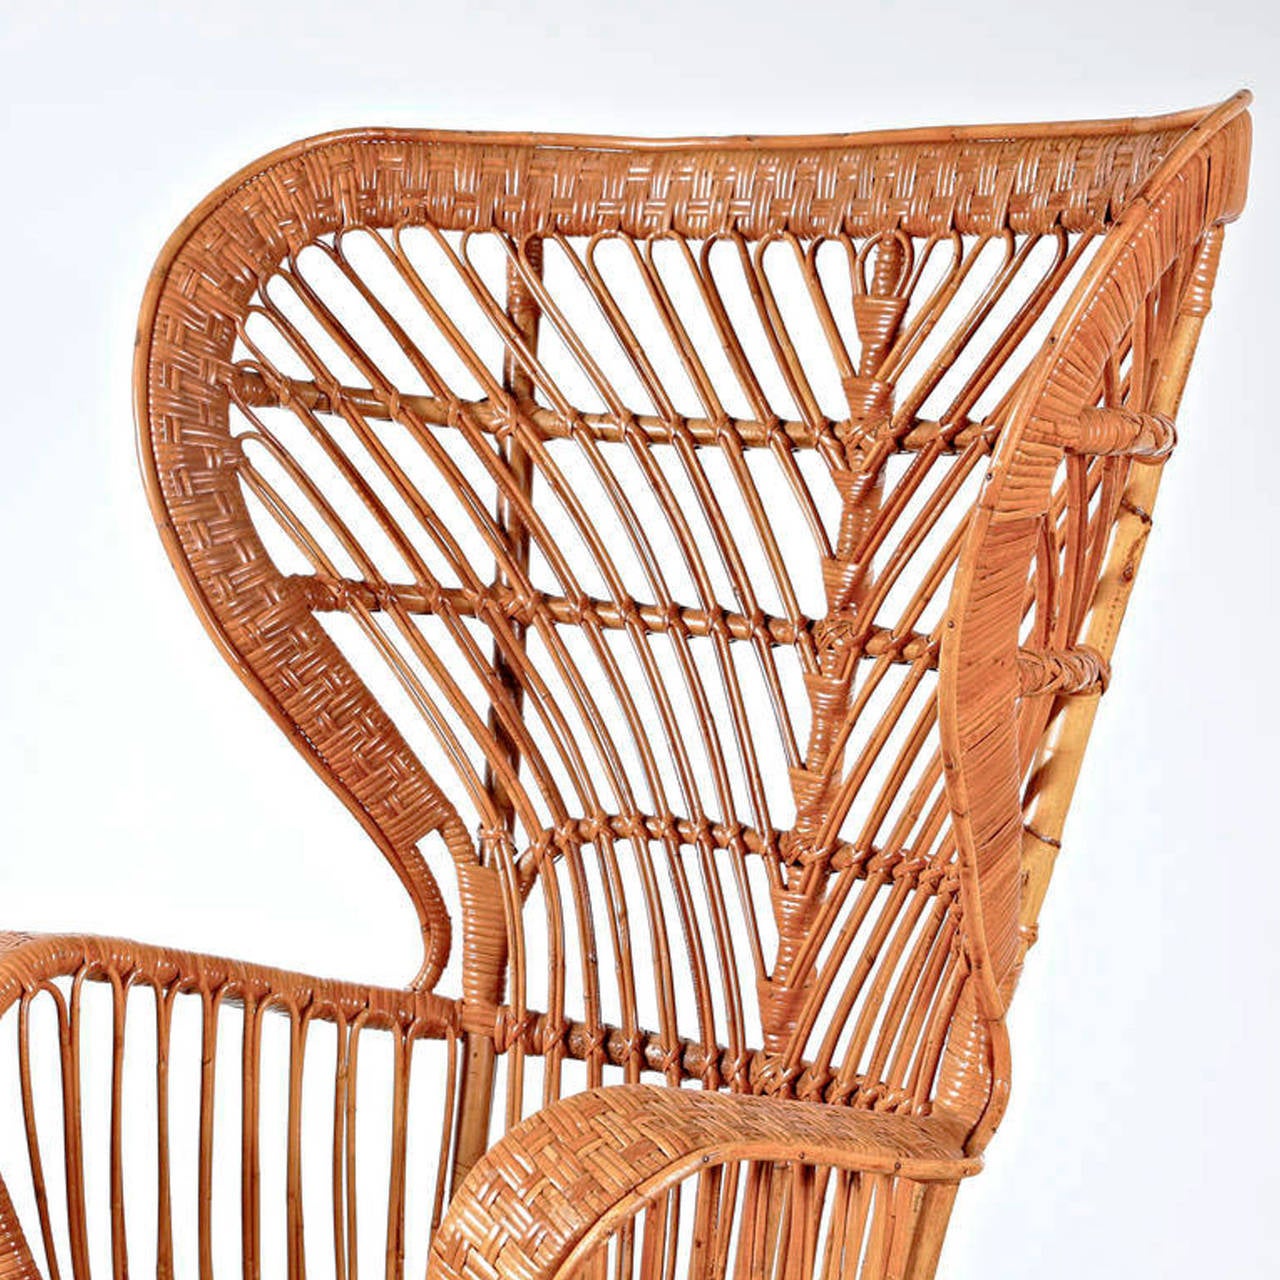 Conte Biancamano Armchair by Gio Ponti and edited by Vittorio Bonacina, hand made in rattan.